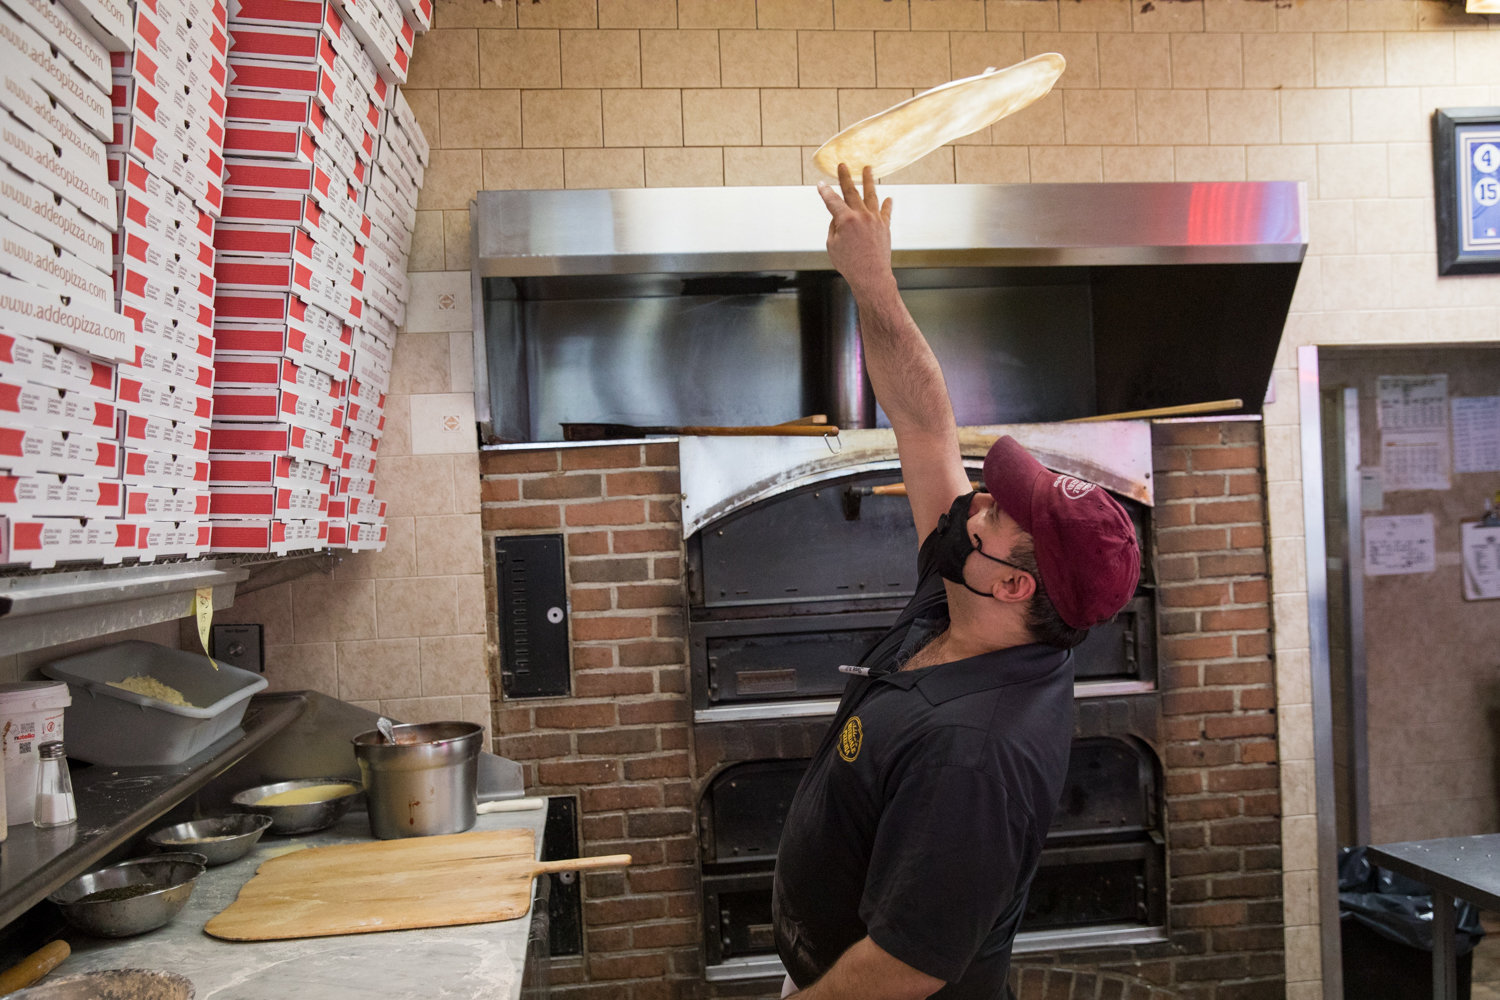 Jody DePasquale, manager of Addeo’s Riverdale Pizza, tosses dough for a pie shortly after opening. The North Riverdale pizza joint has managed to stay open despite the coronavirus pandemic, but the loss of revenue from the elimination of dining in meant employees had to work reduced hours.